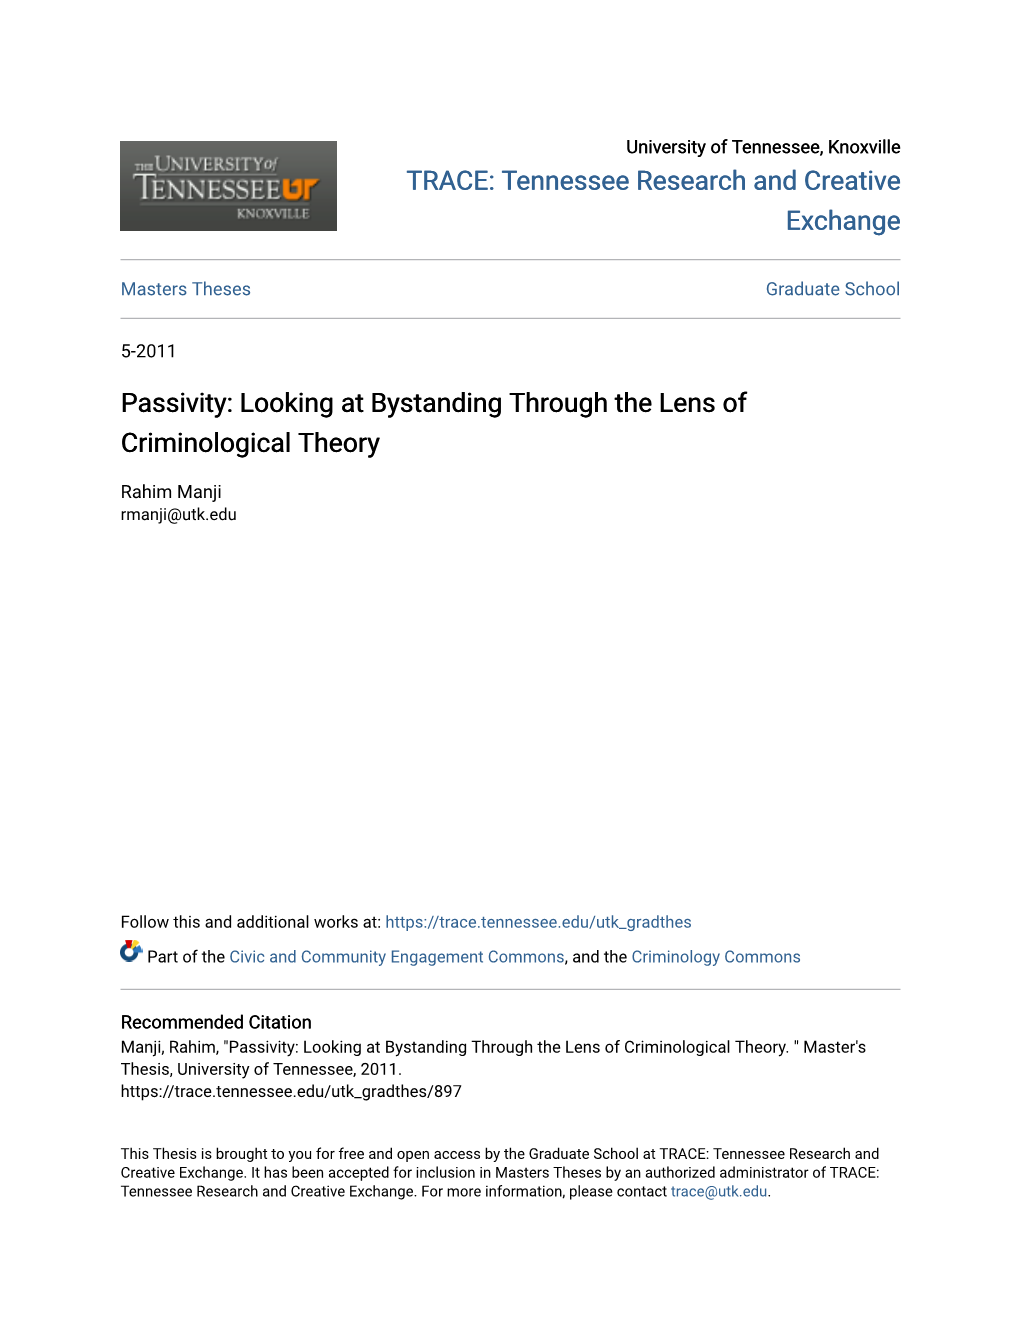 Passivity: Looking at Bystanding Through the Lens of Criminological Theory